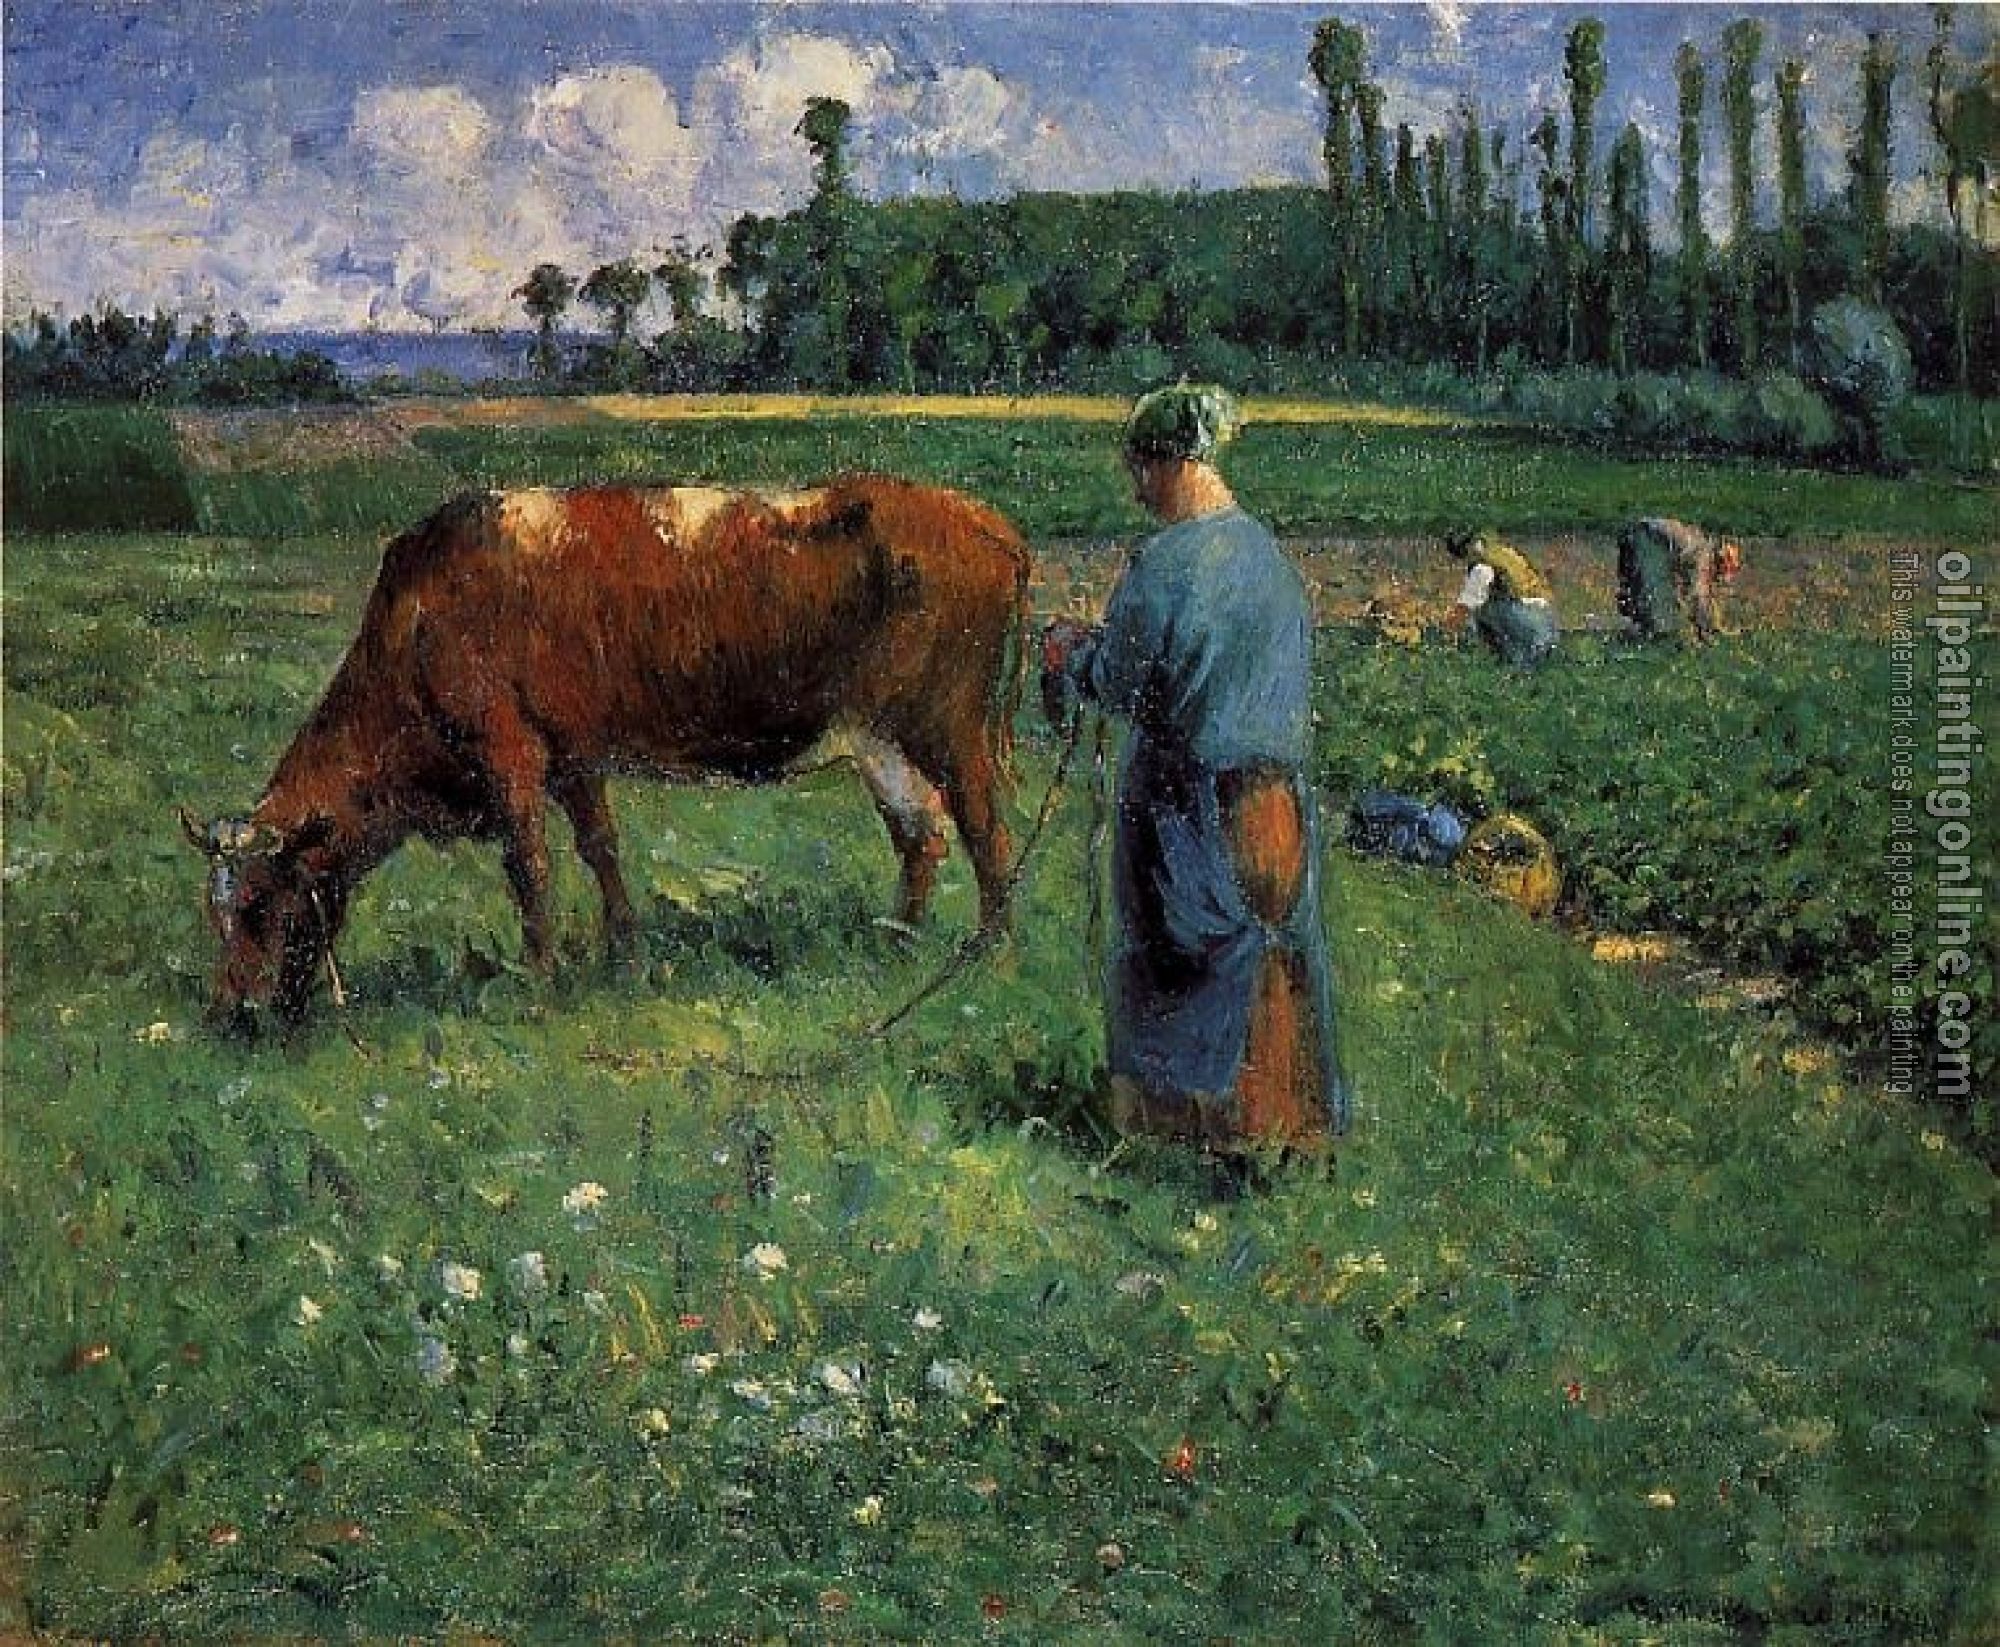 Pissarro, Camille - Girl Tending a Cow in a Pasture